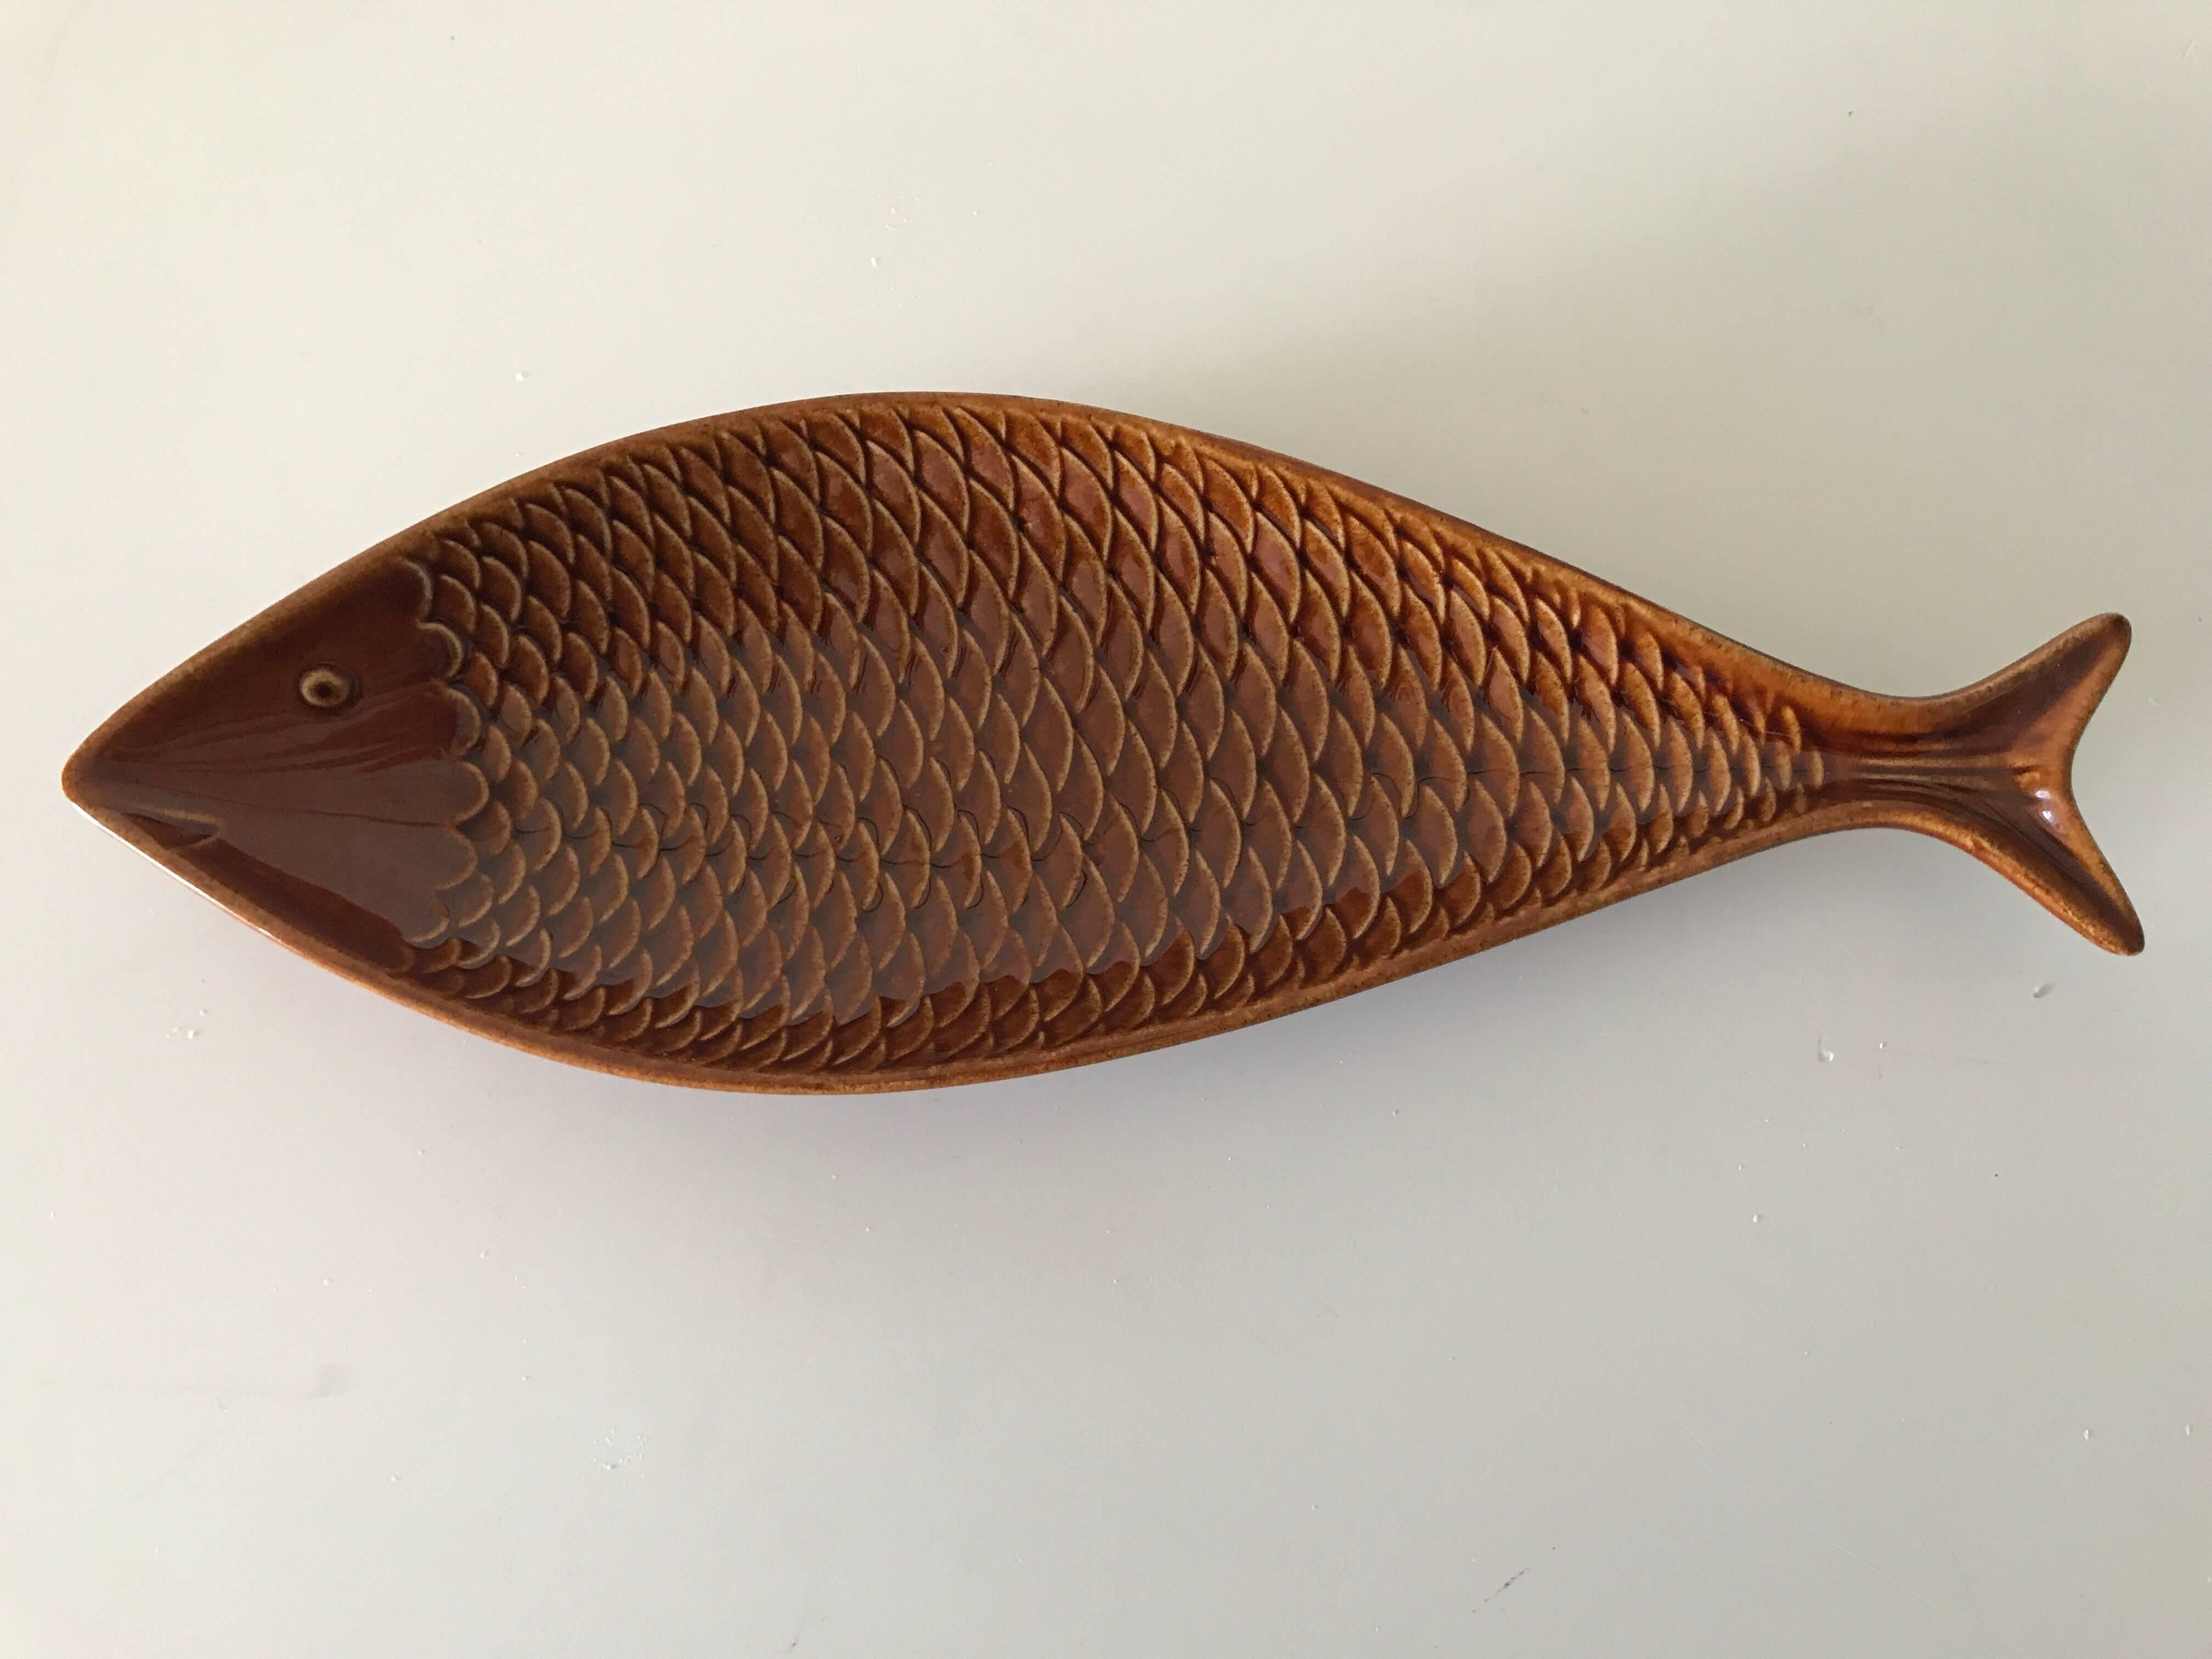 Pair of Swedish, 1950 fish dishes by Stig Lindberg Gustavsberg porcelain factory. 
A very nice pair of serving dishes in shape of a fish, made by one of the greatest Swedish porcelain designers, Stig Lindberg. We have 2 pair available.
They measure